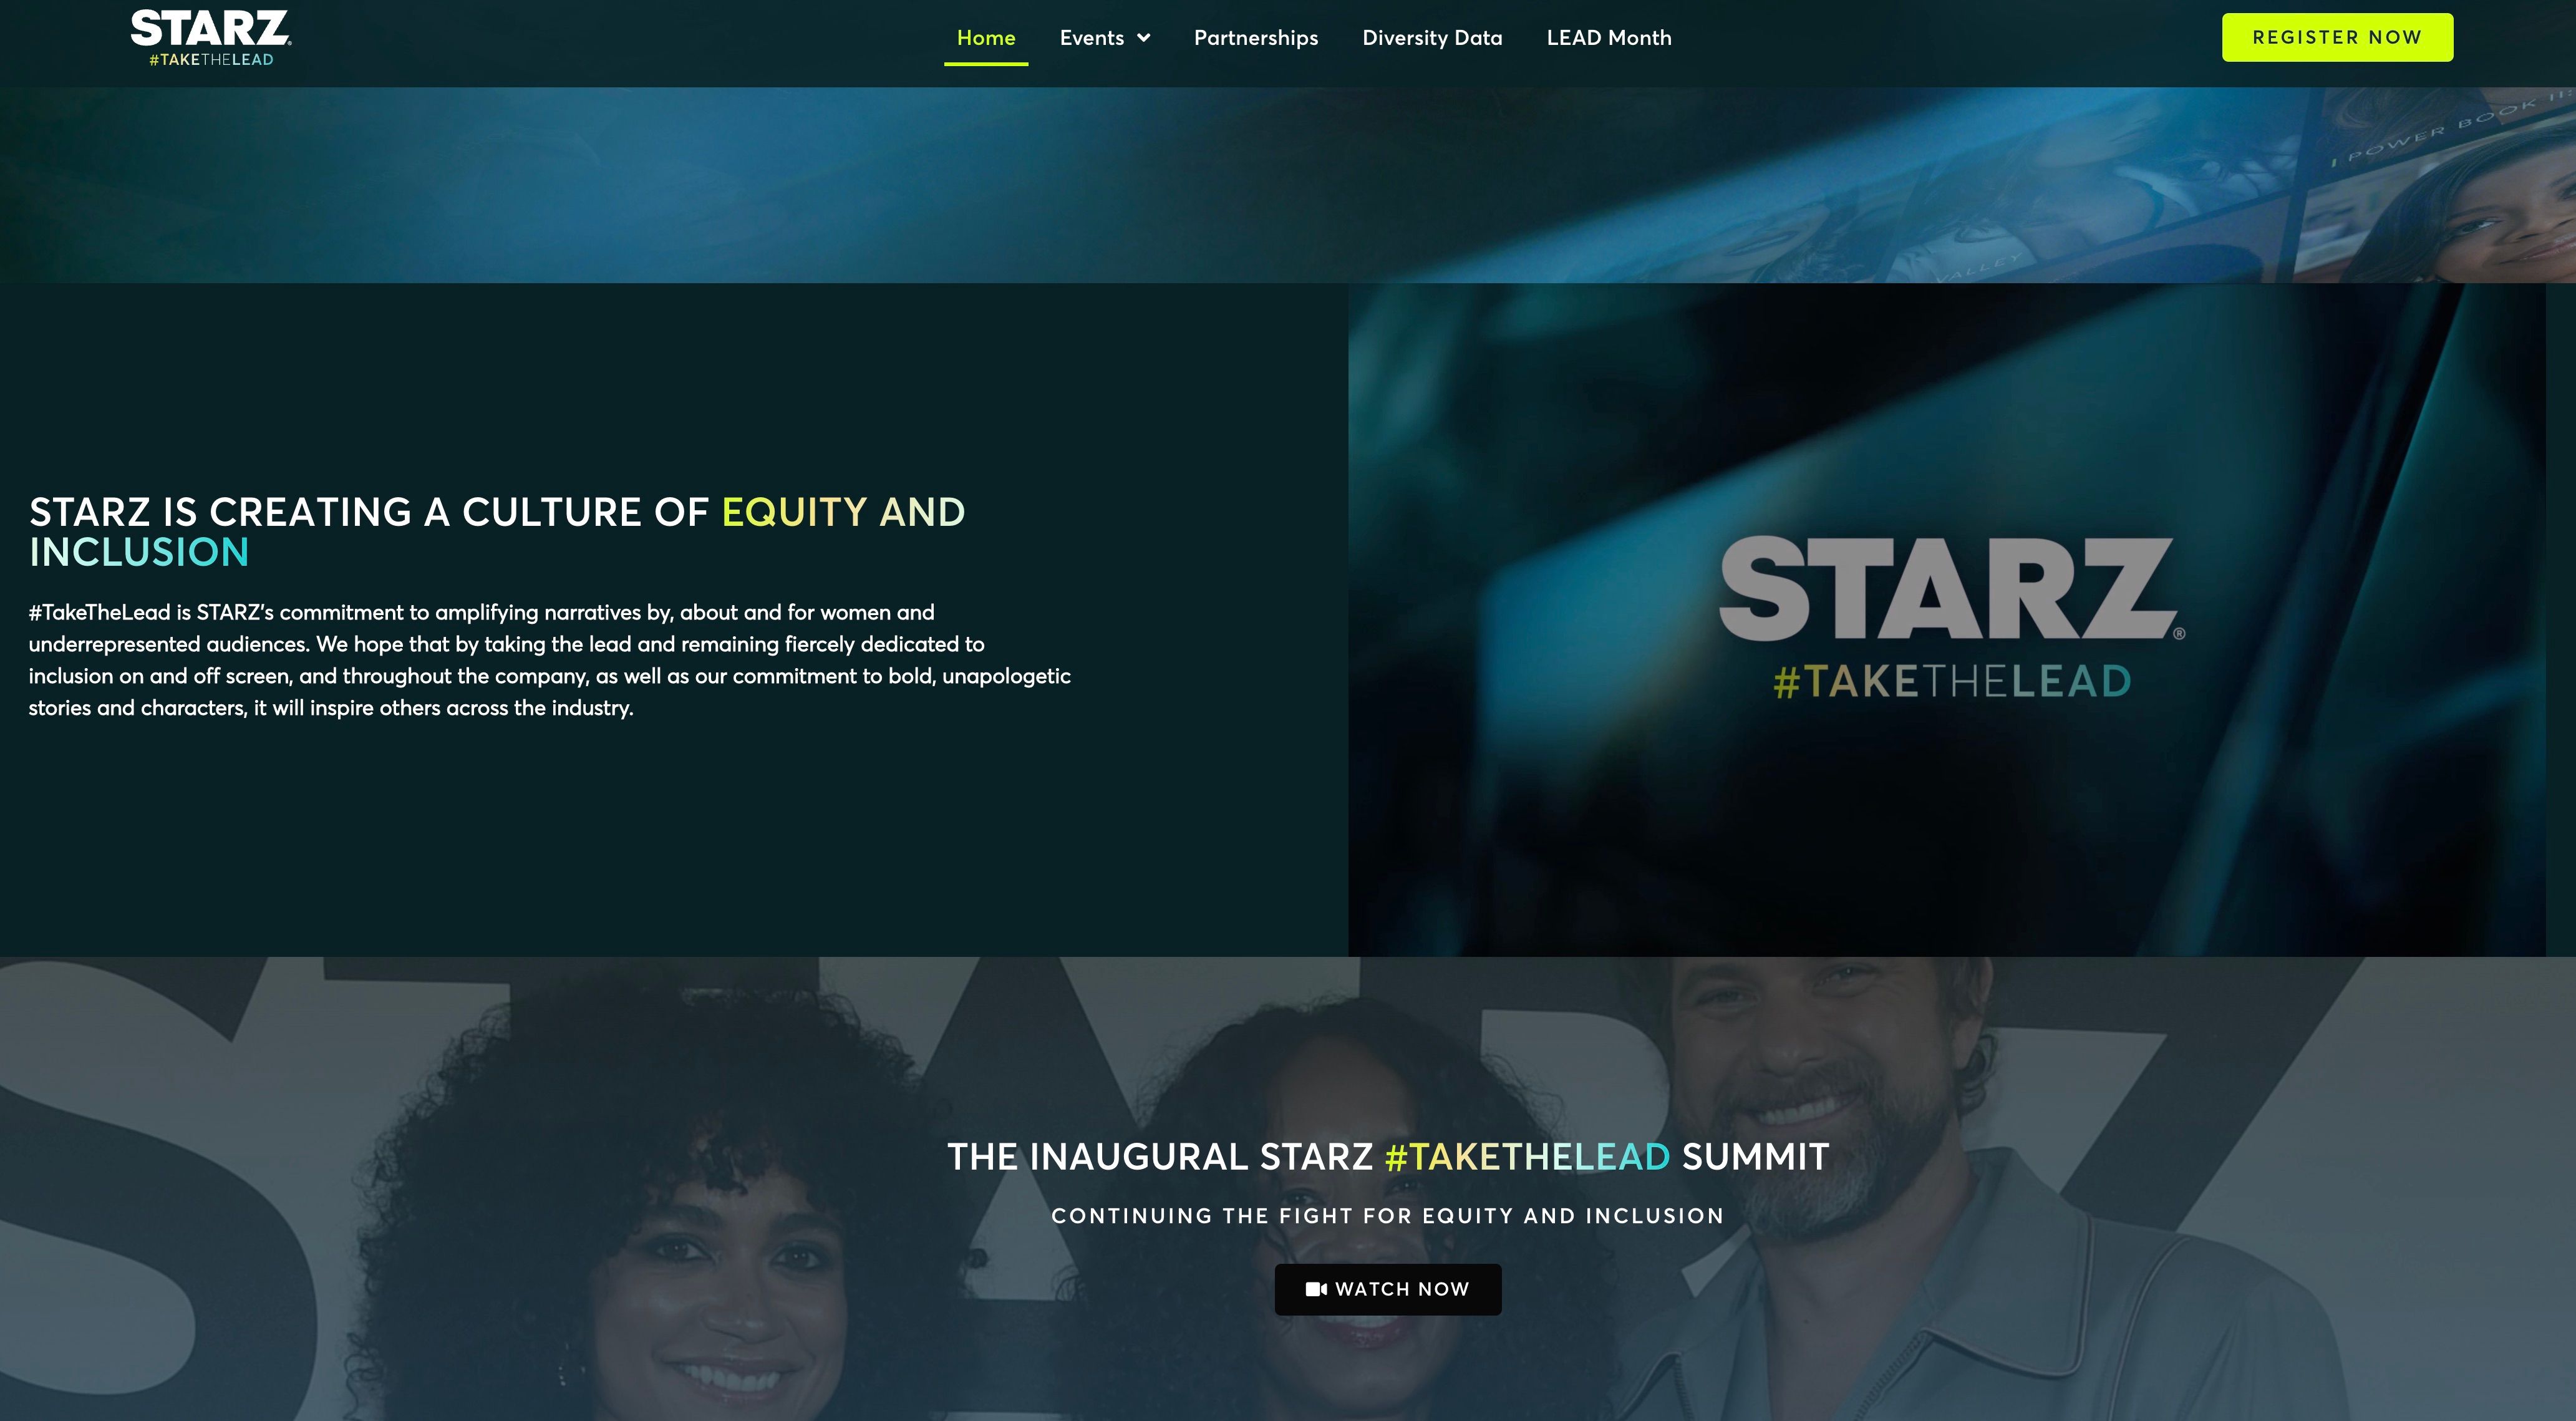 Starz Content Landing Page with Take The Lead Hashtag